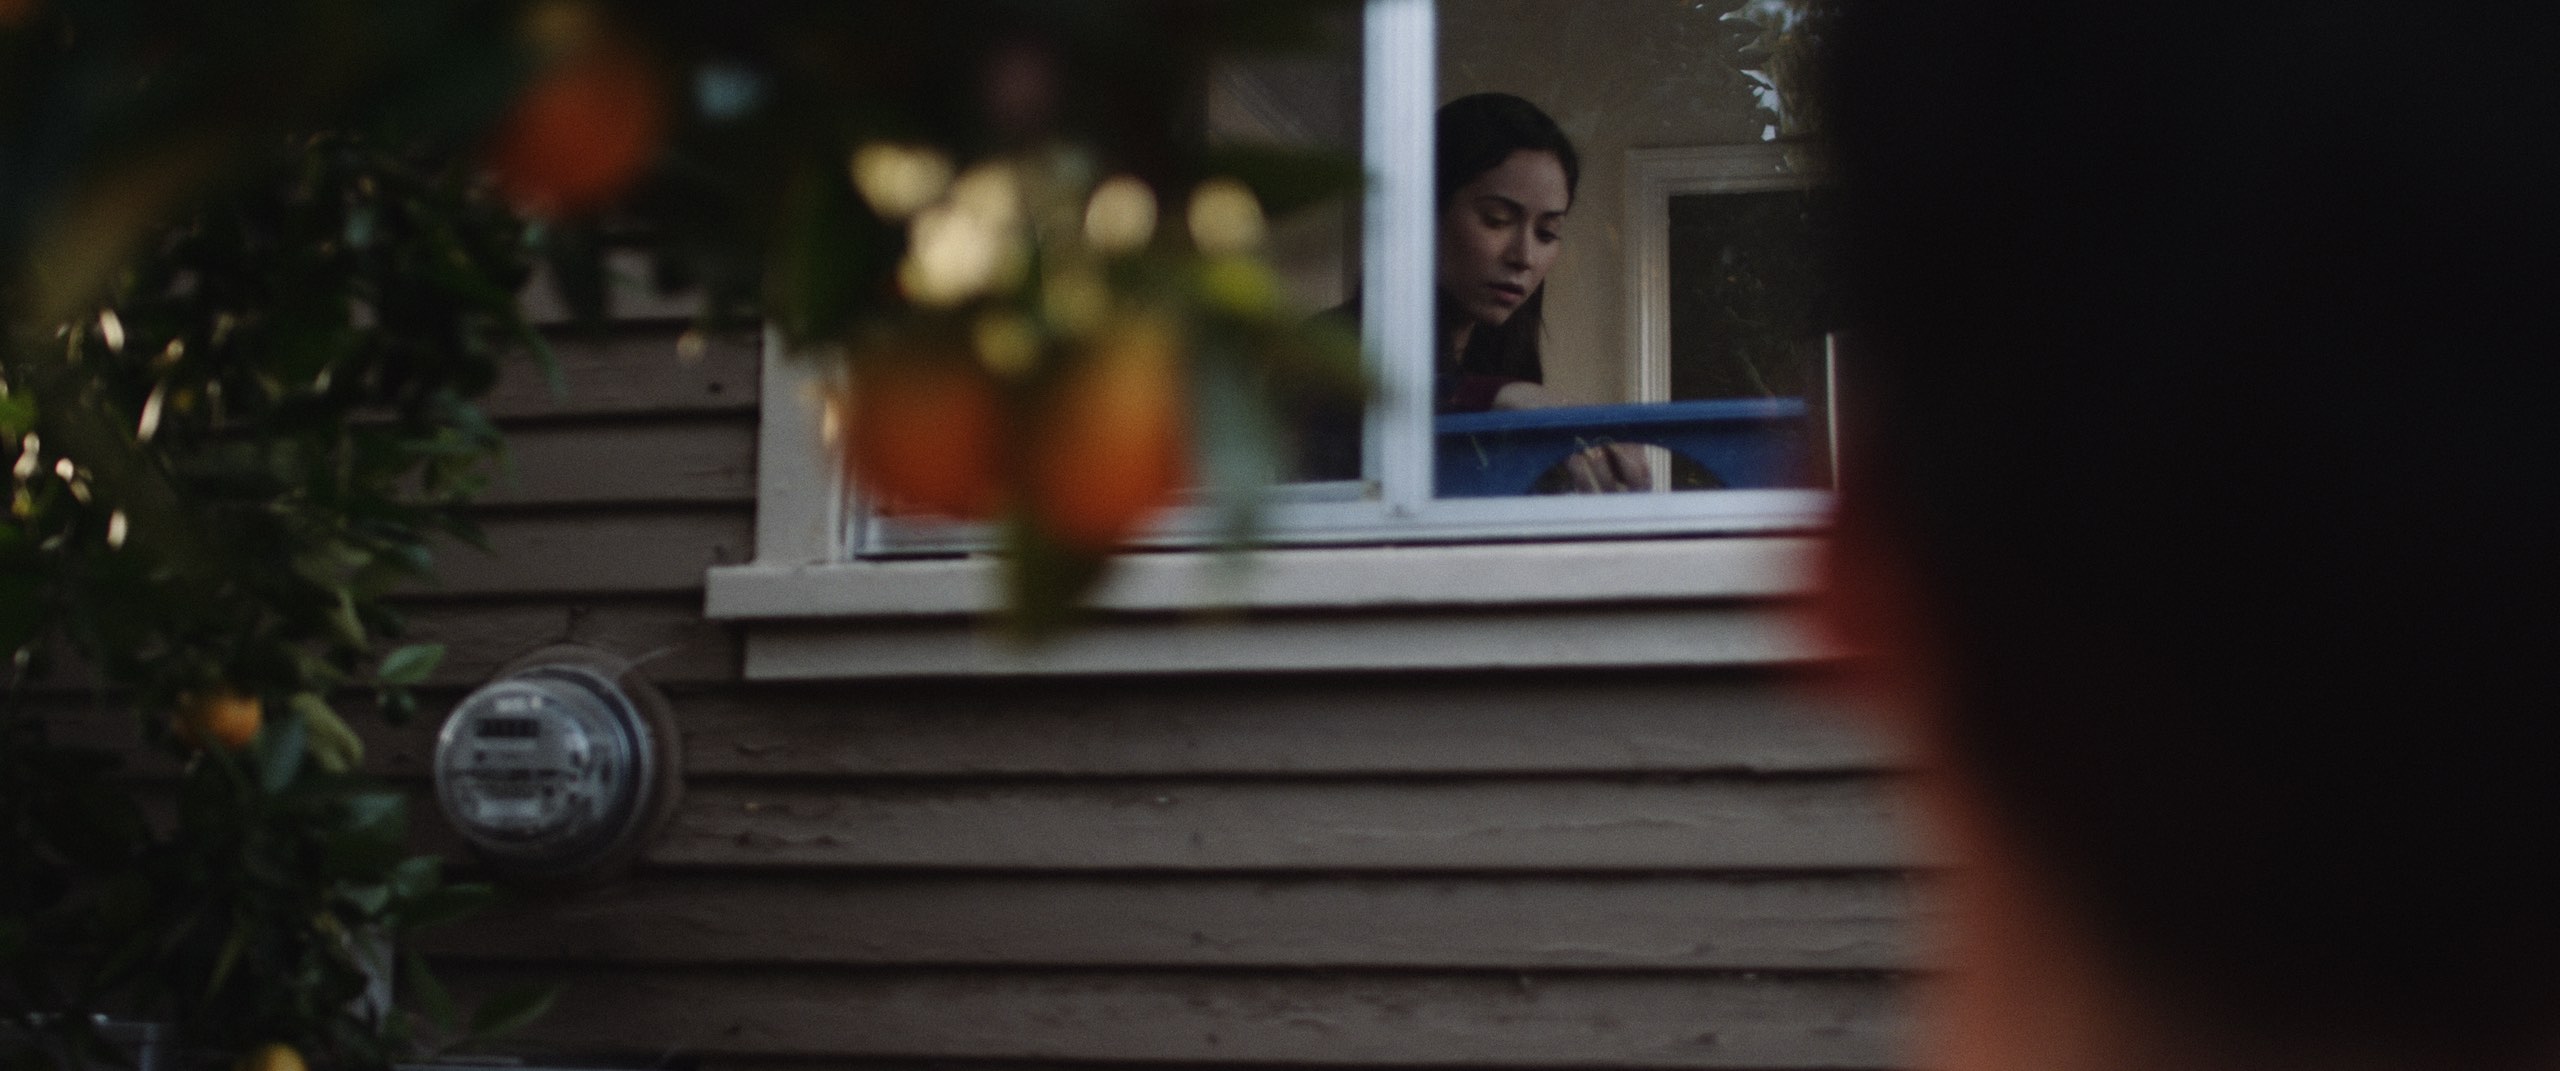 Grace From Above, A C&I Studios Original Short Film View from behind of man looking into window of house at a woman